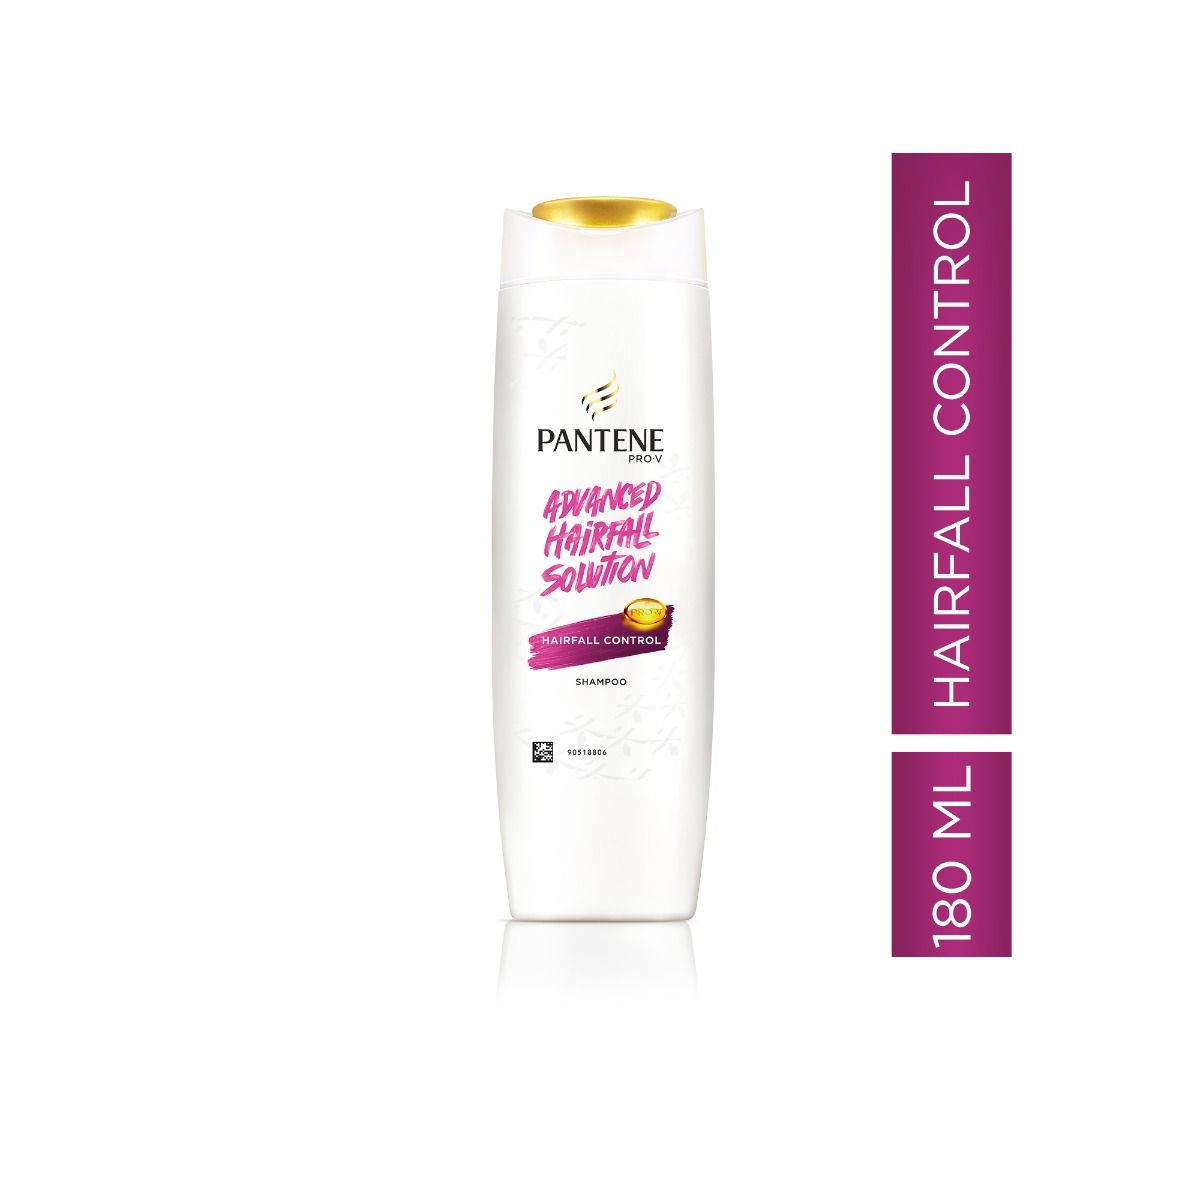 Pantene Pro-V Hairfall Control Shampoo, 180 ml Price, Uses, Side Effects,  Composition - Apollo Pharmacy